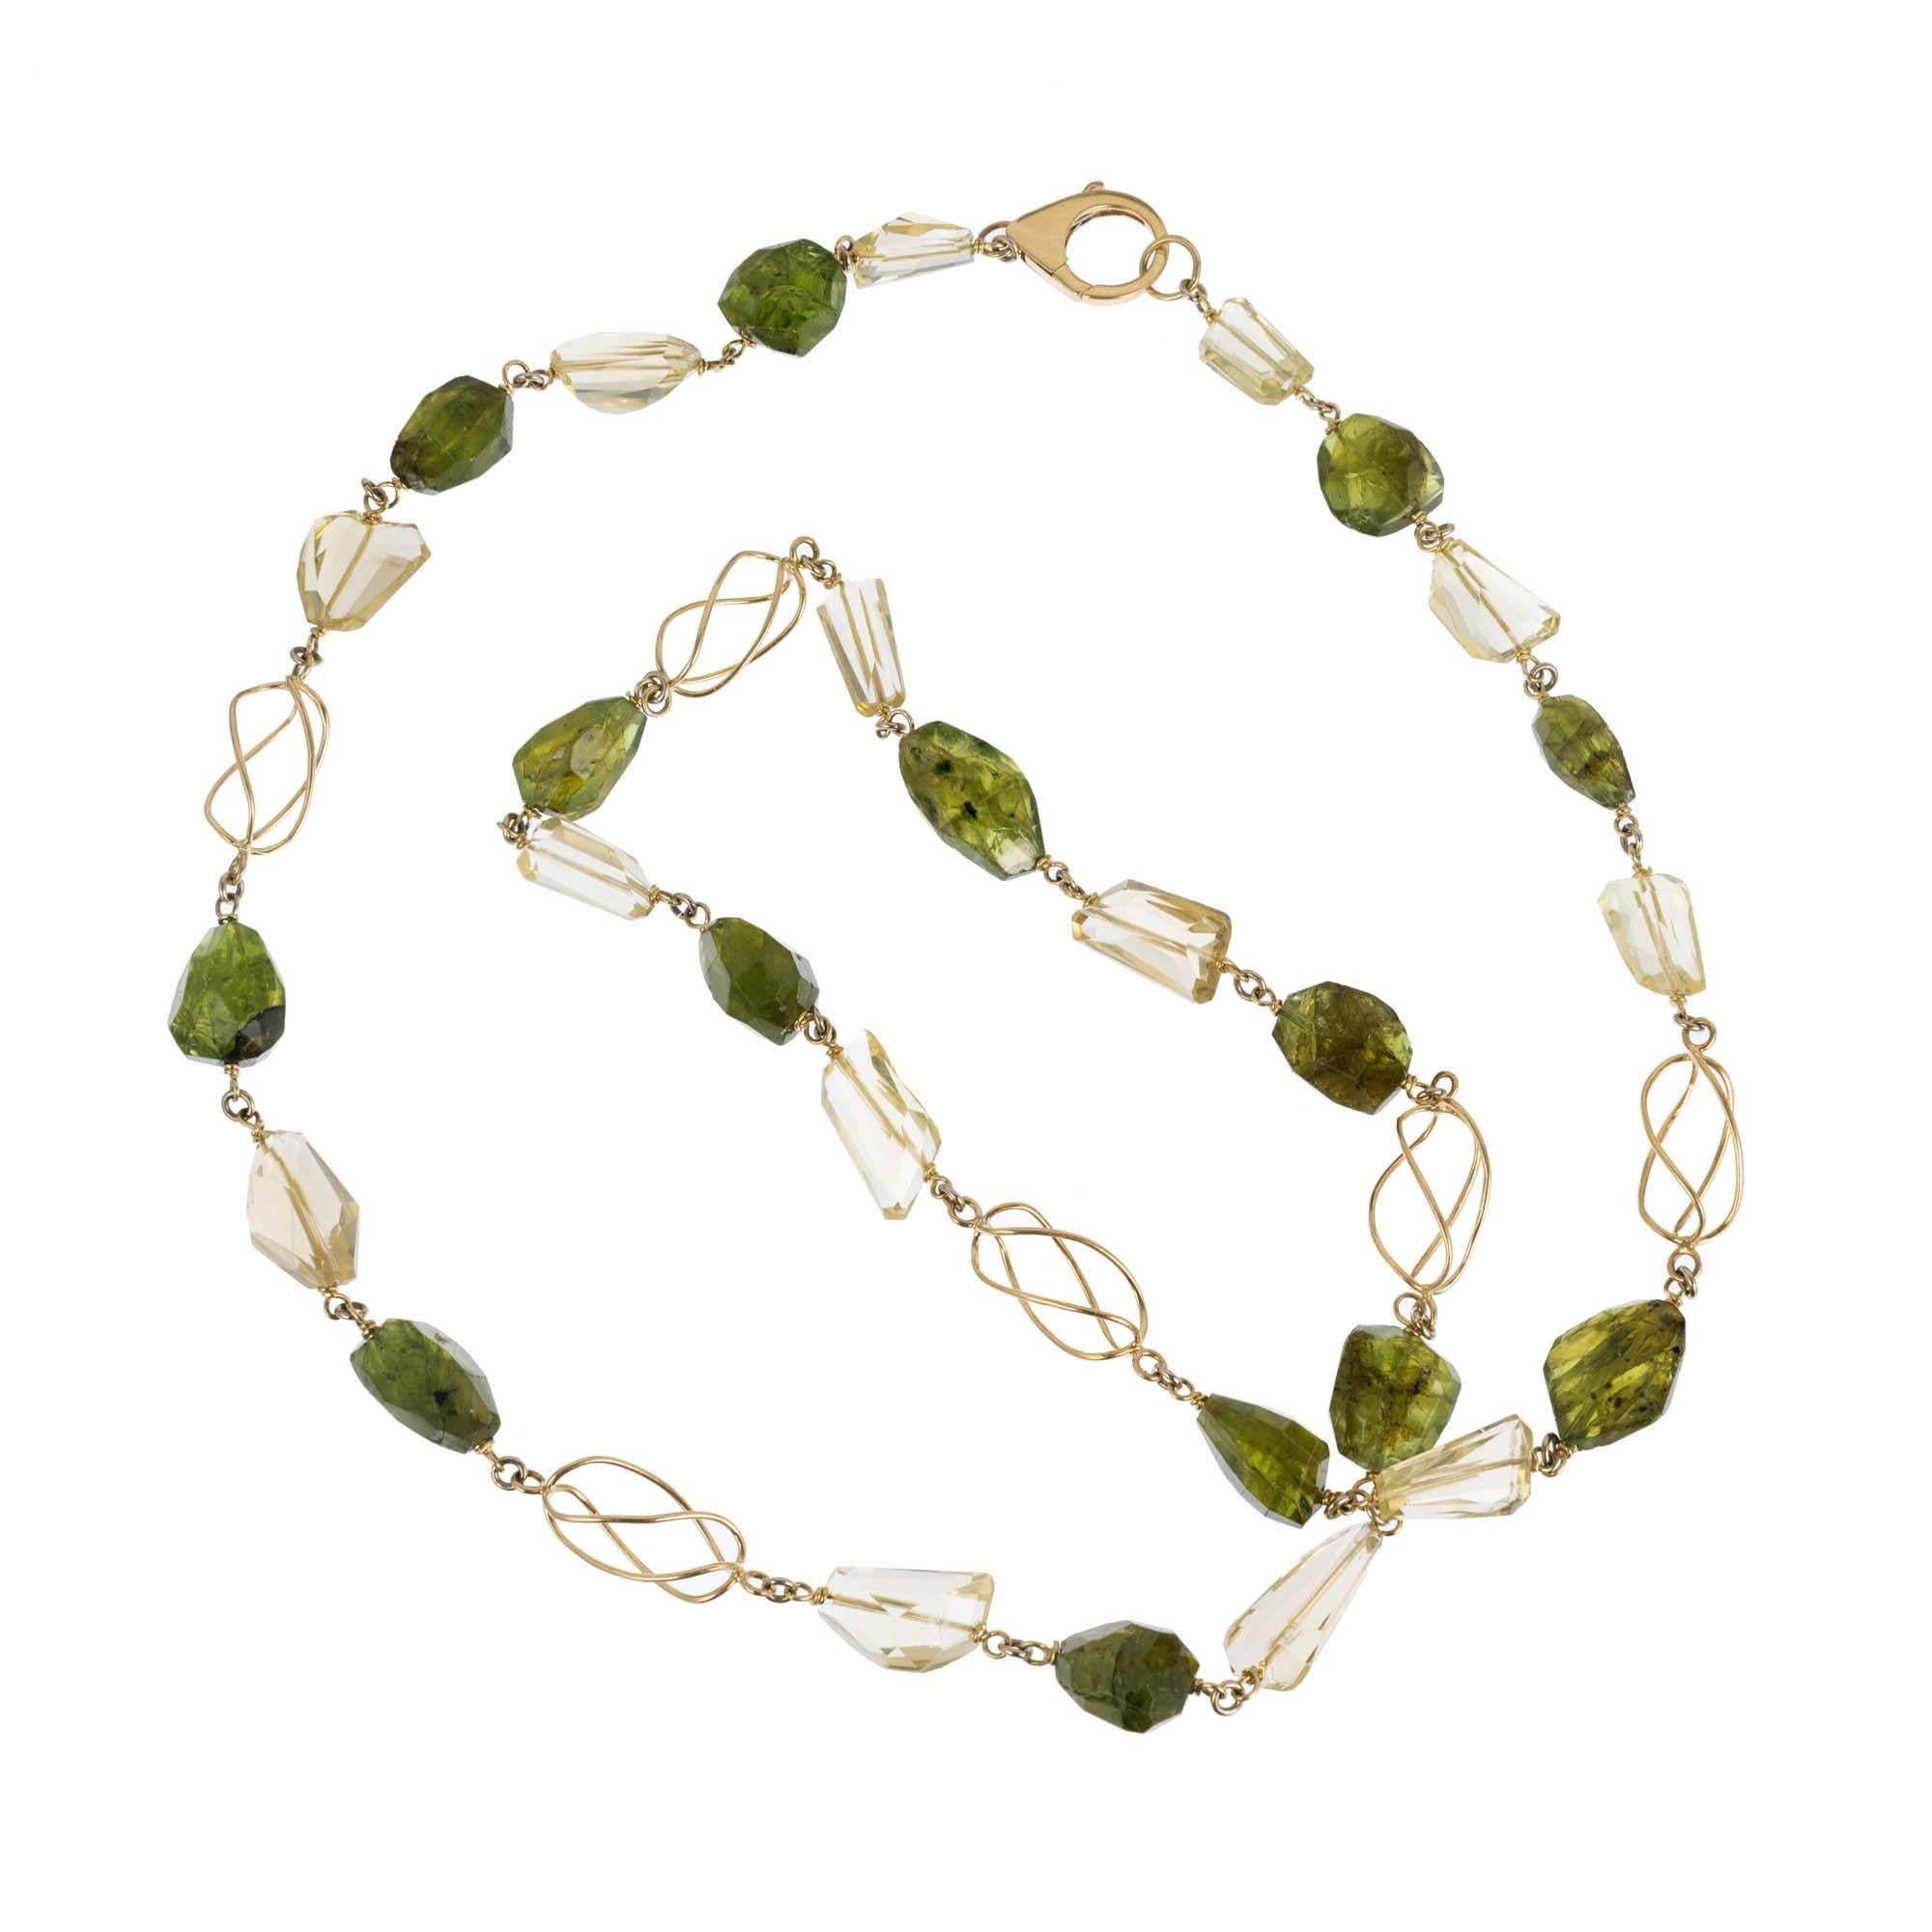 18k yellow gold peridot citrine beaded necklace. Freeform citrine and peridot beads separated by open 3-dimensional 18k yellow gold swirls. Can be worn long or doubled on the neck. Gia certified Peridot 

14 multi-faceted champagne citrine beads,